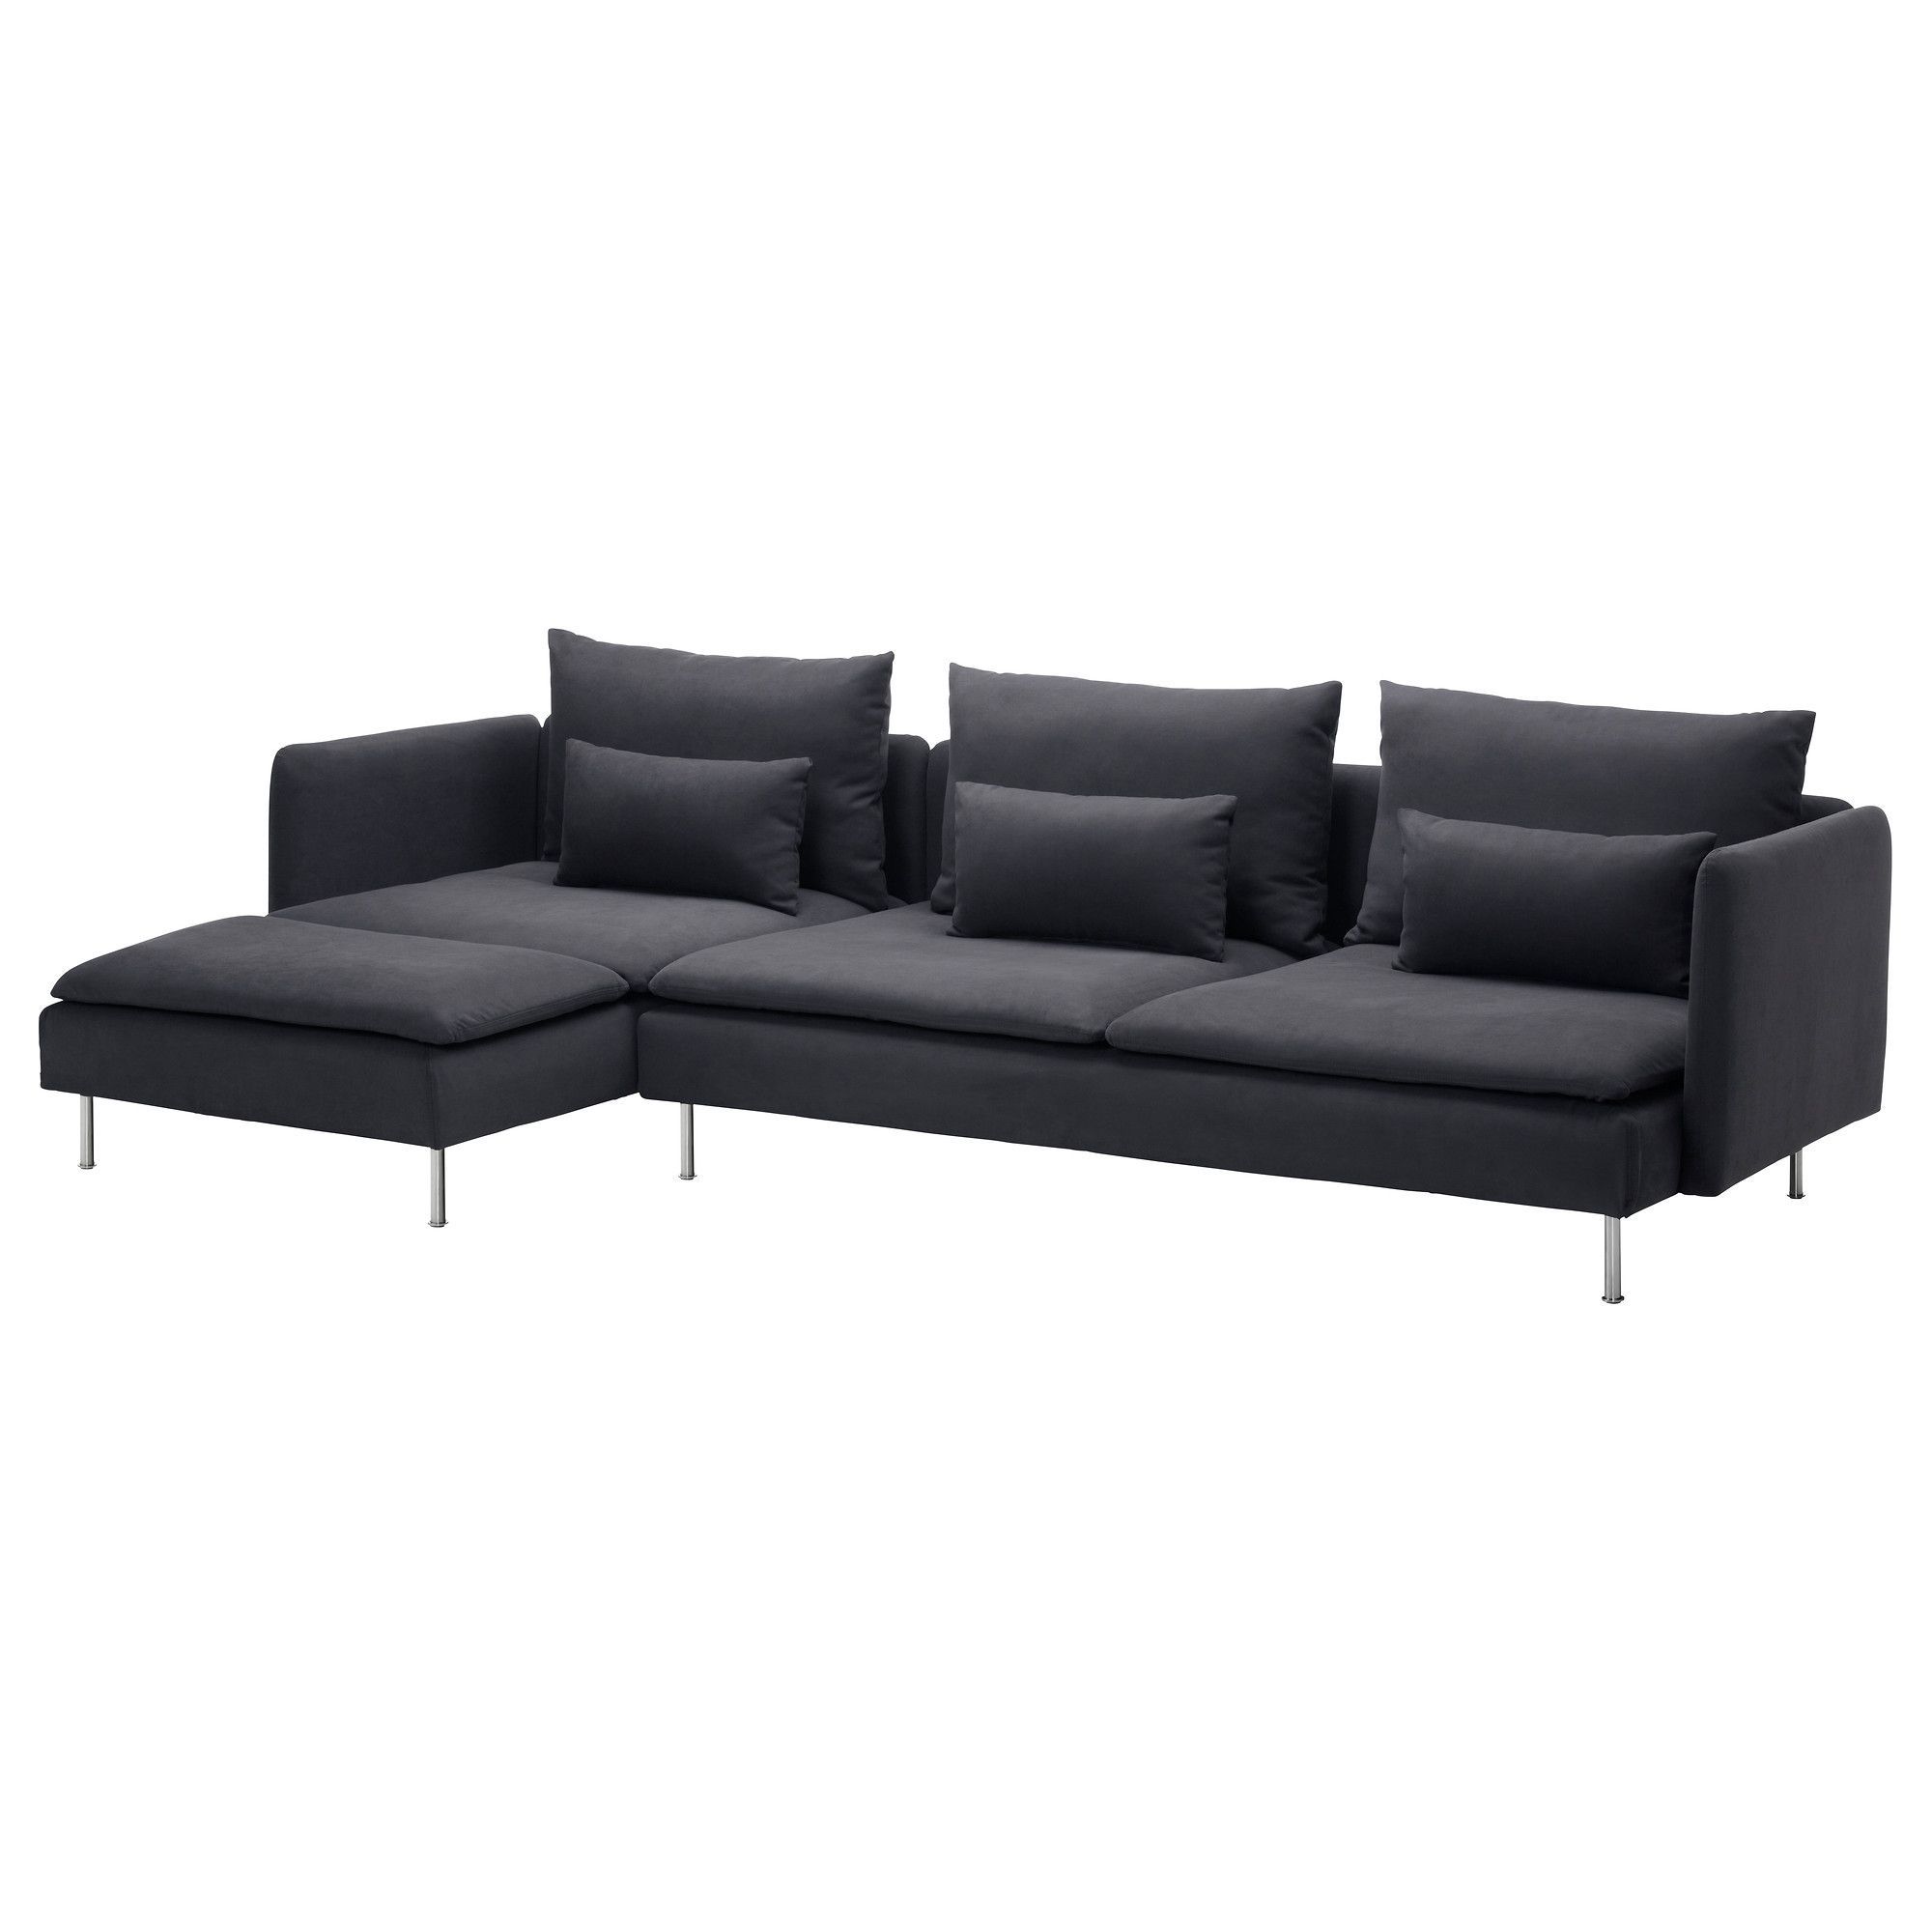 Us – Furniture And Home Furnishings | Ikea Sofa, Modular With Regard To Riley Retro Mid Century Modern Fabric Upholstered Left Facing Chaise Sectional Sofas (View 2 of 15)